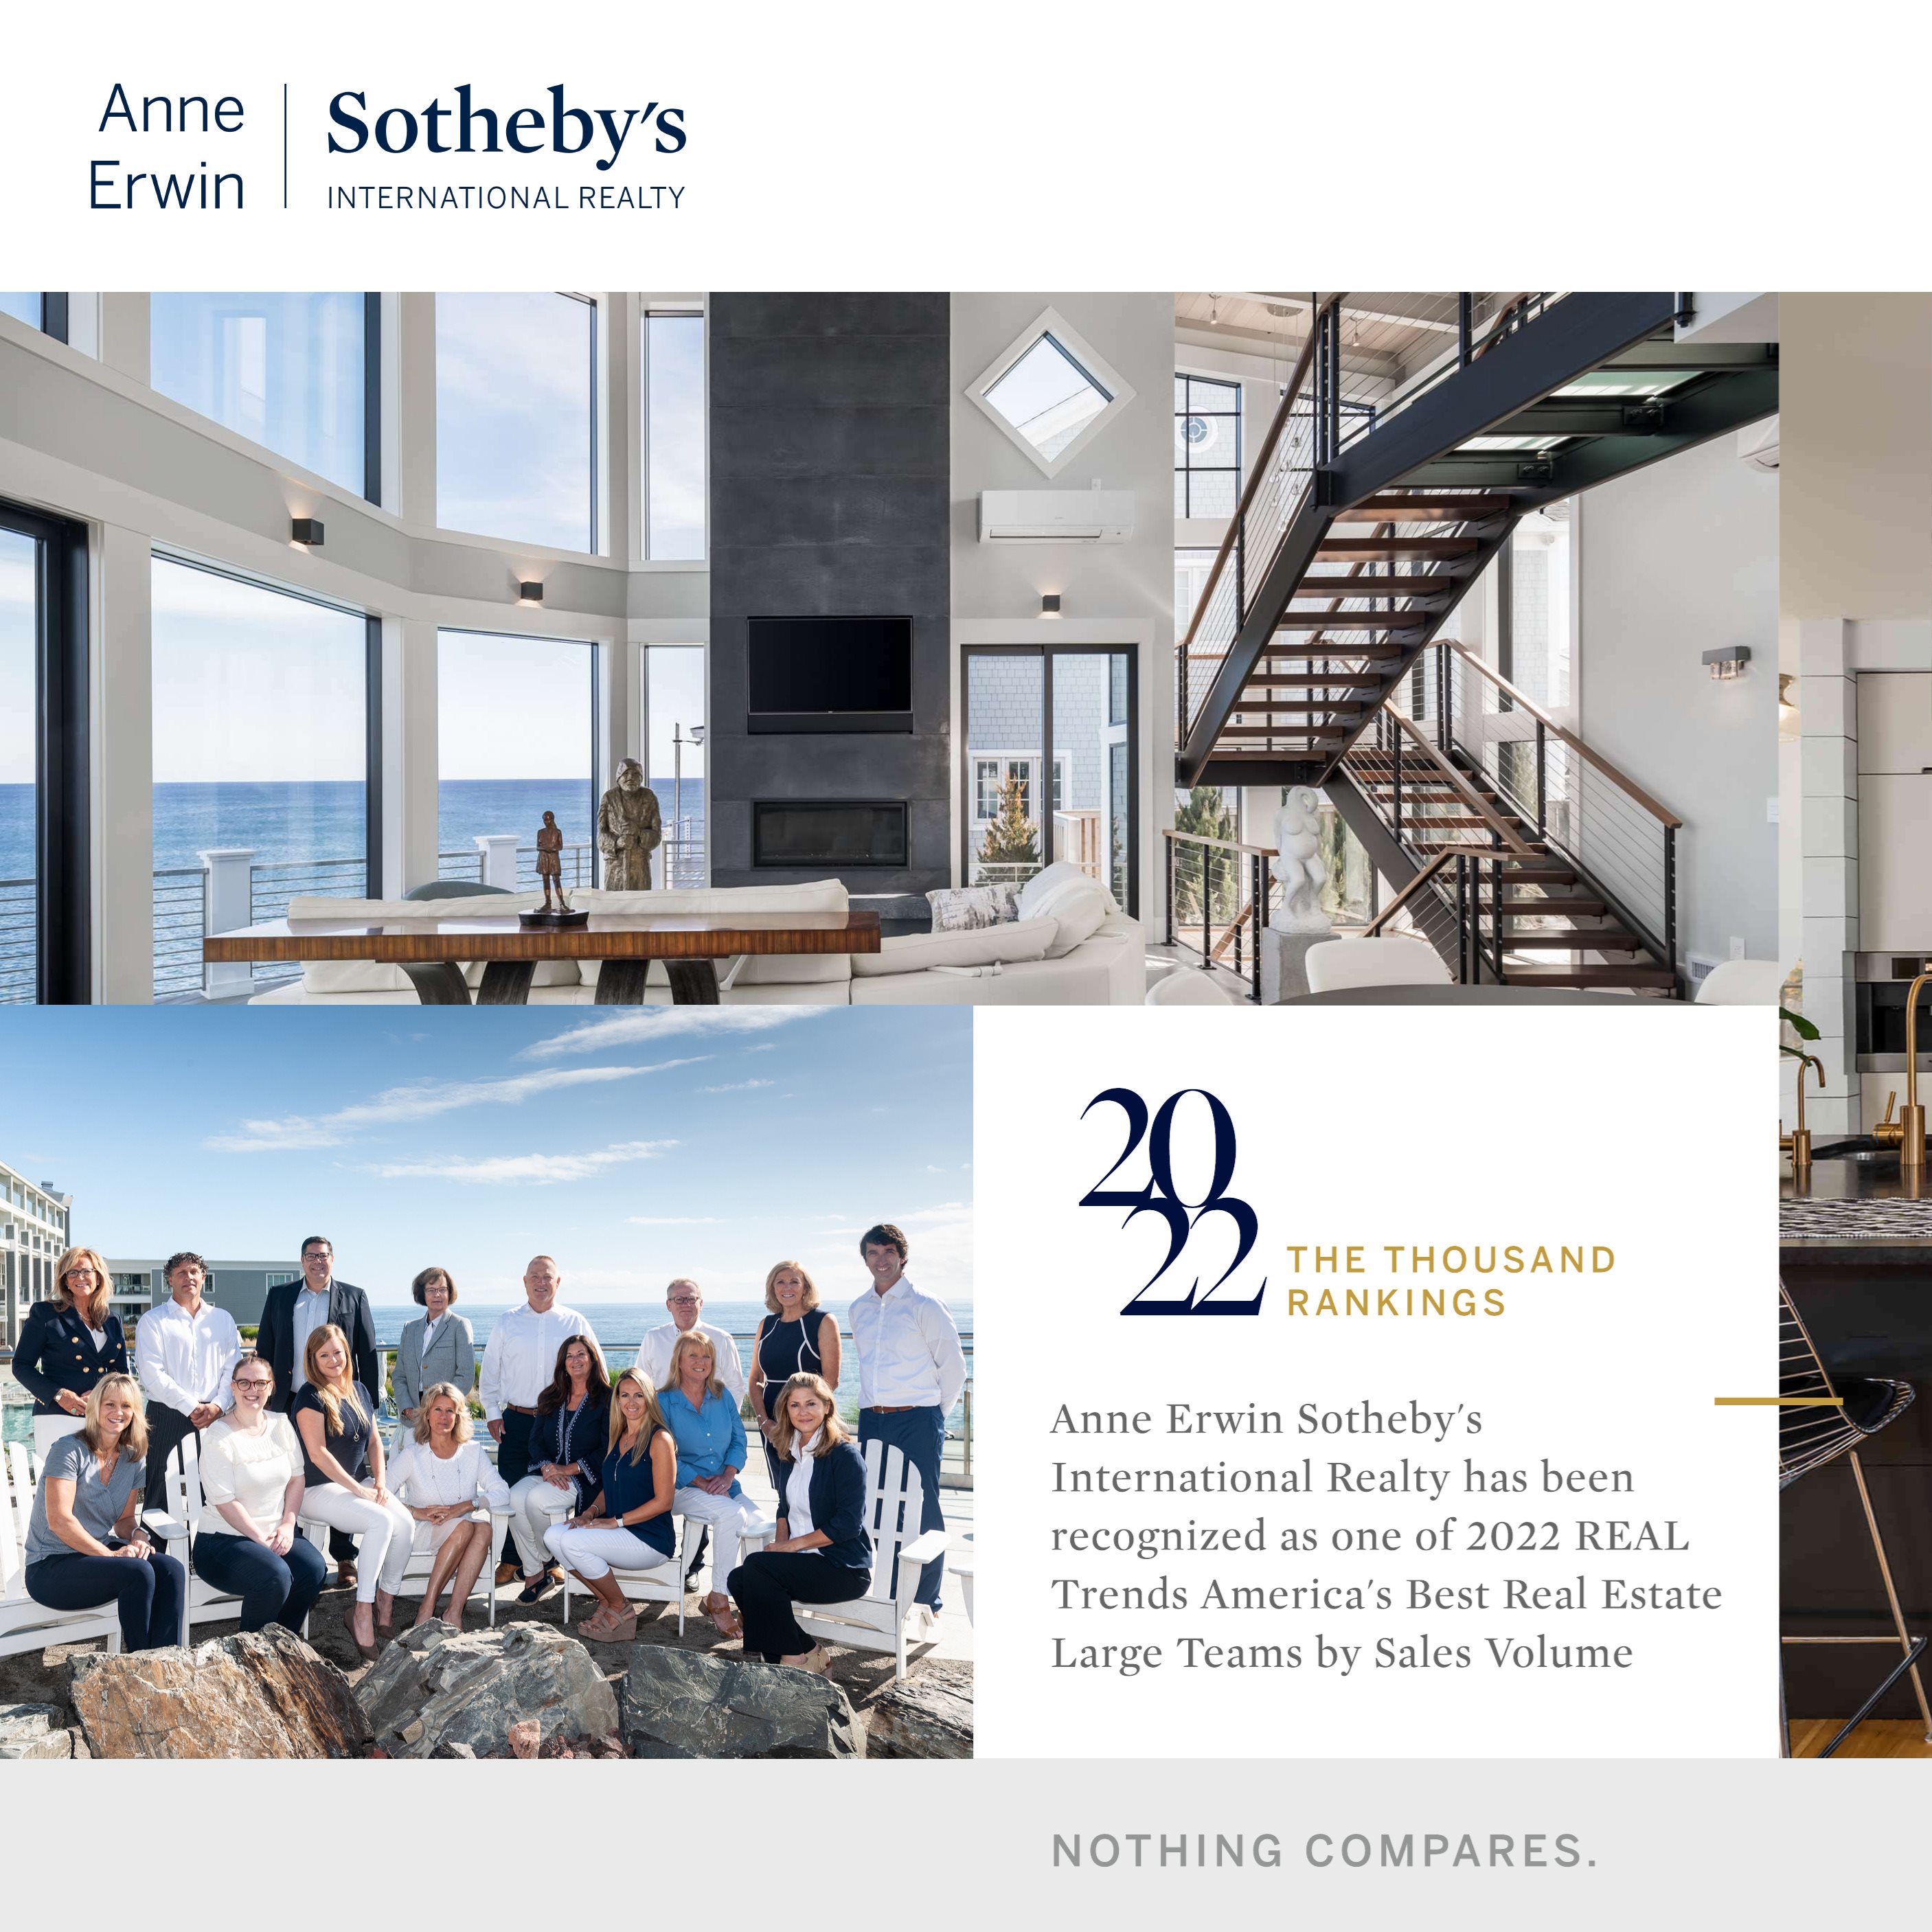 2022 sothebys anne erwin rankings infographic